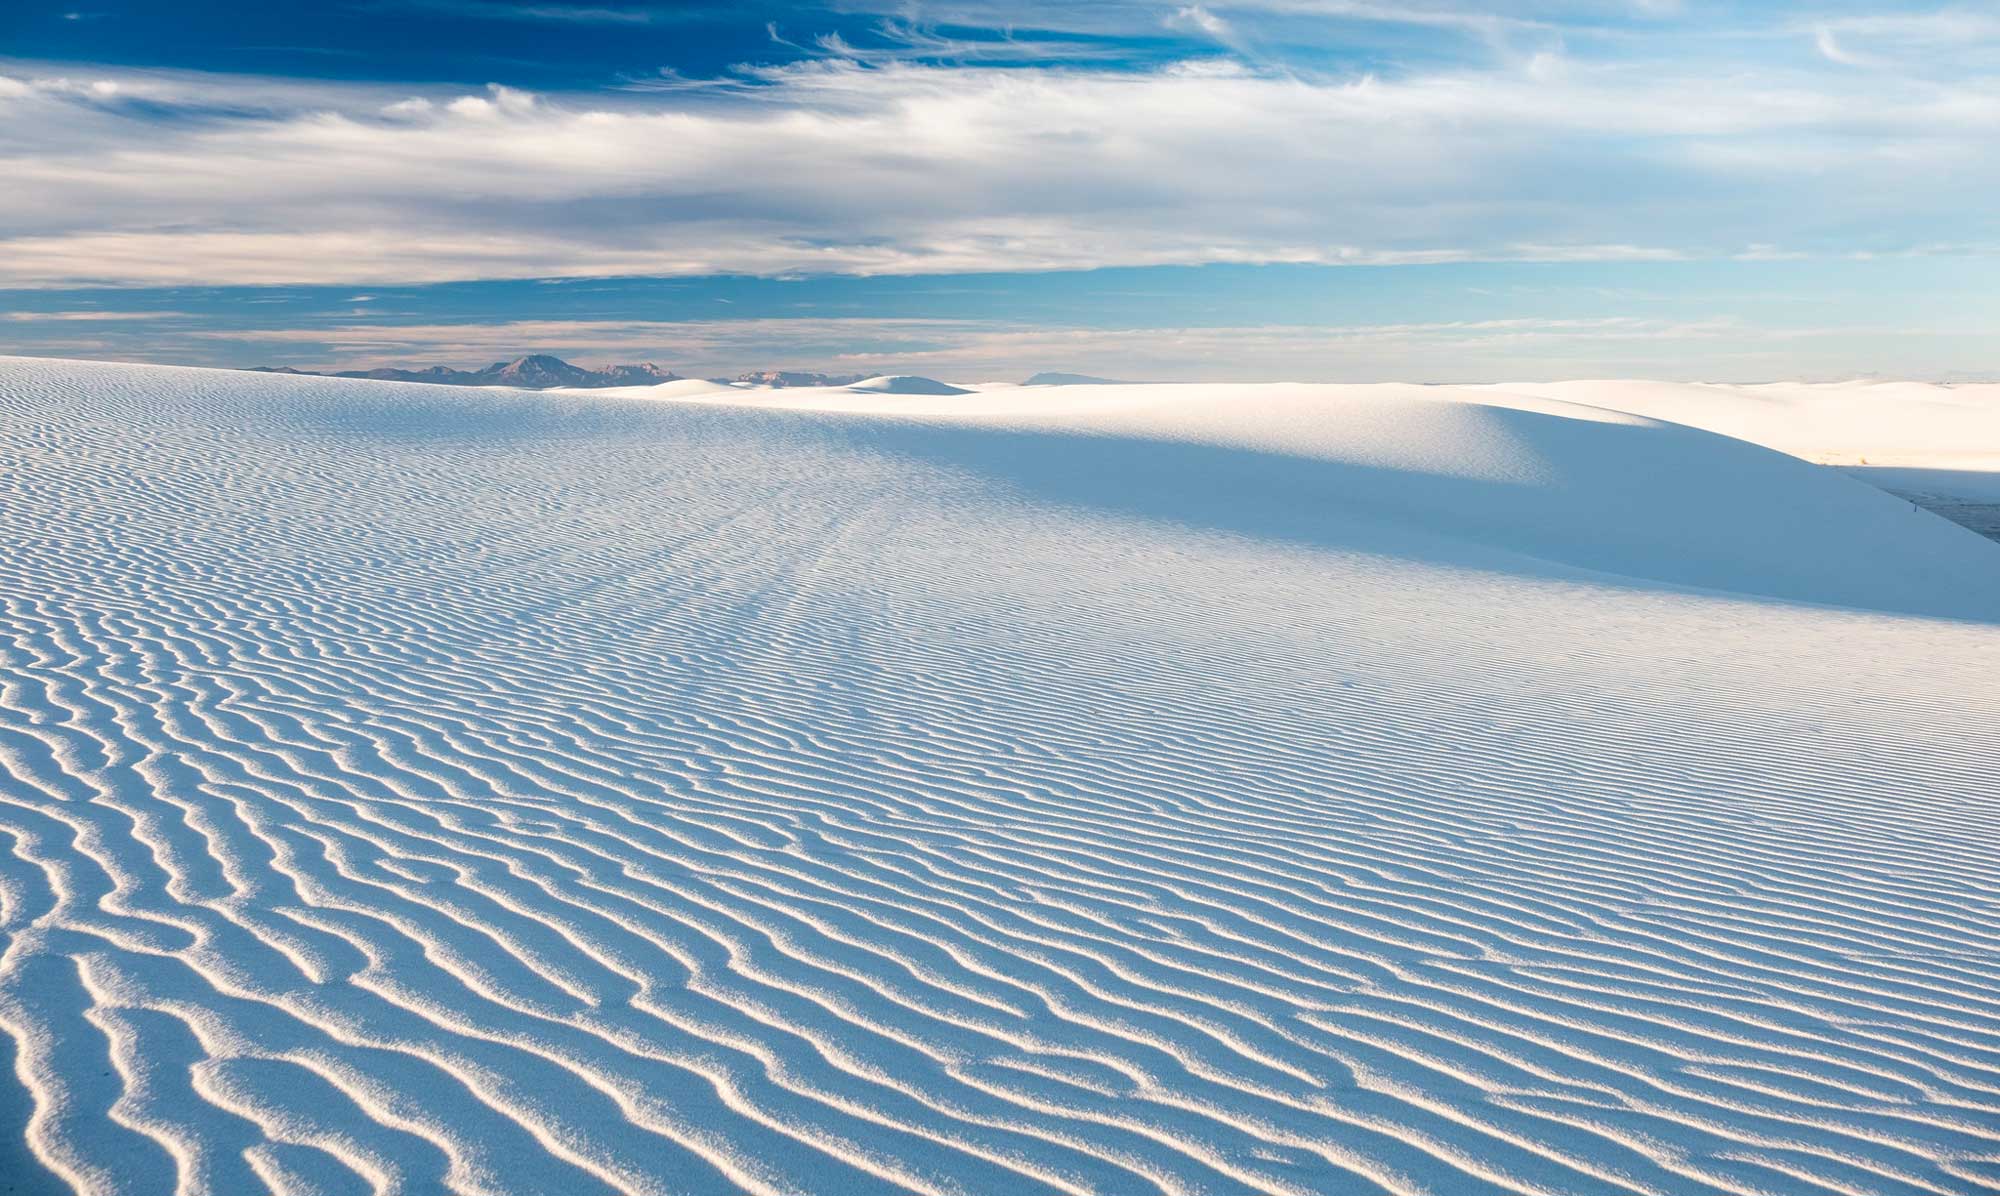 Photograph of sand dunes at White Sands National Monument in New Mexico.